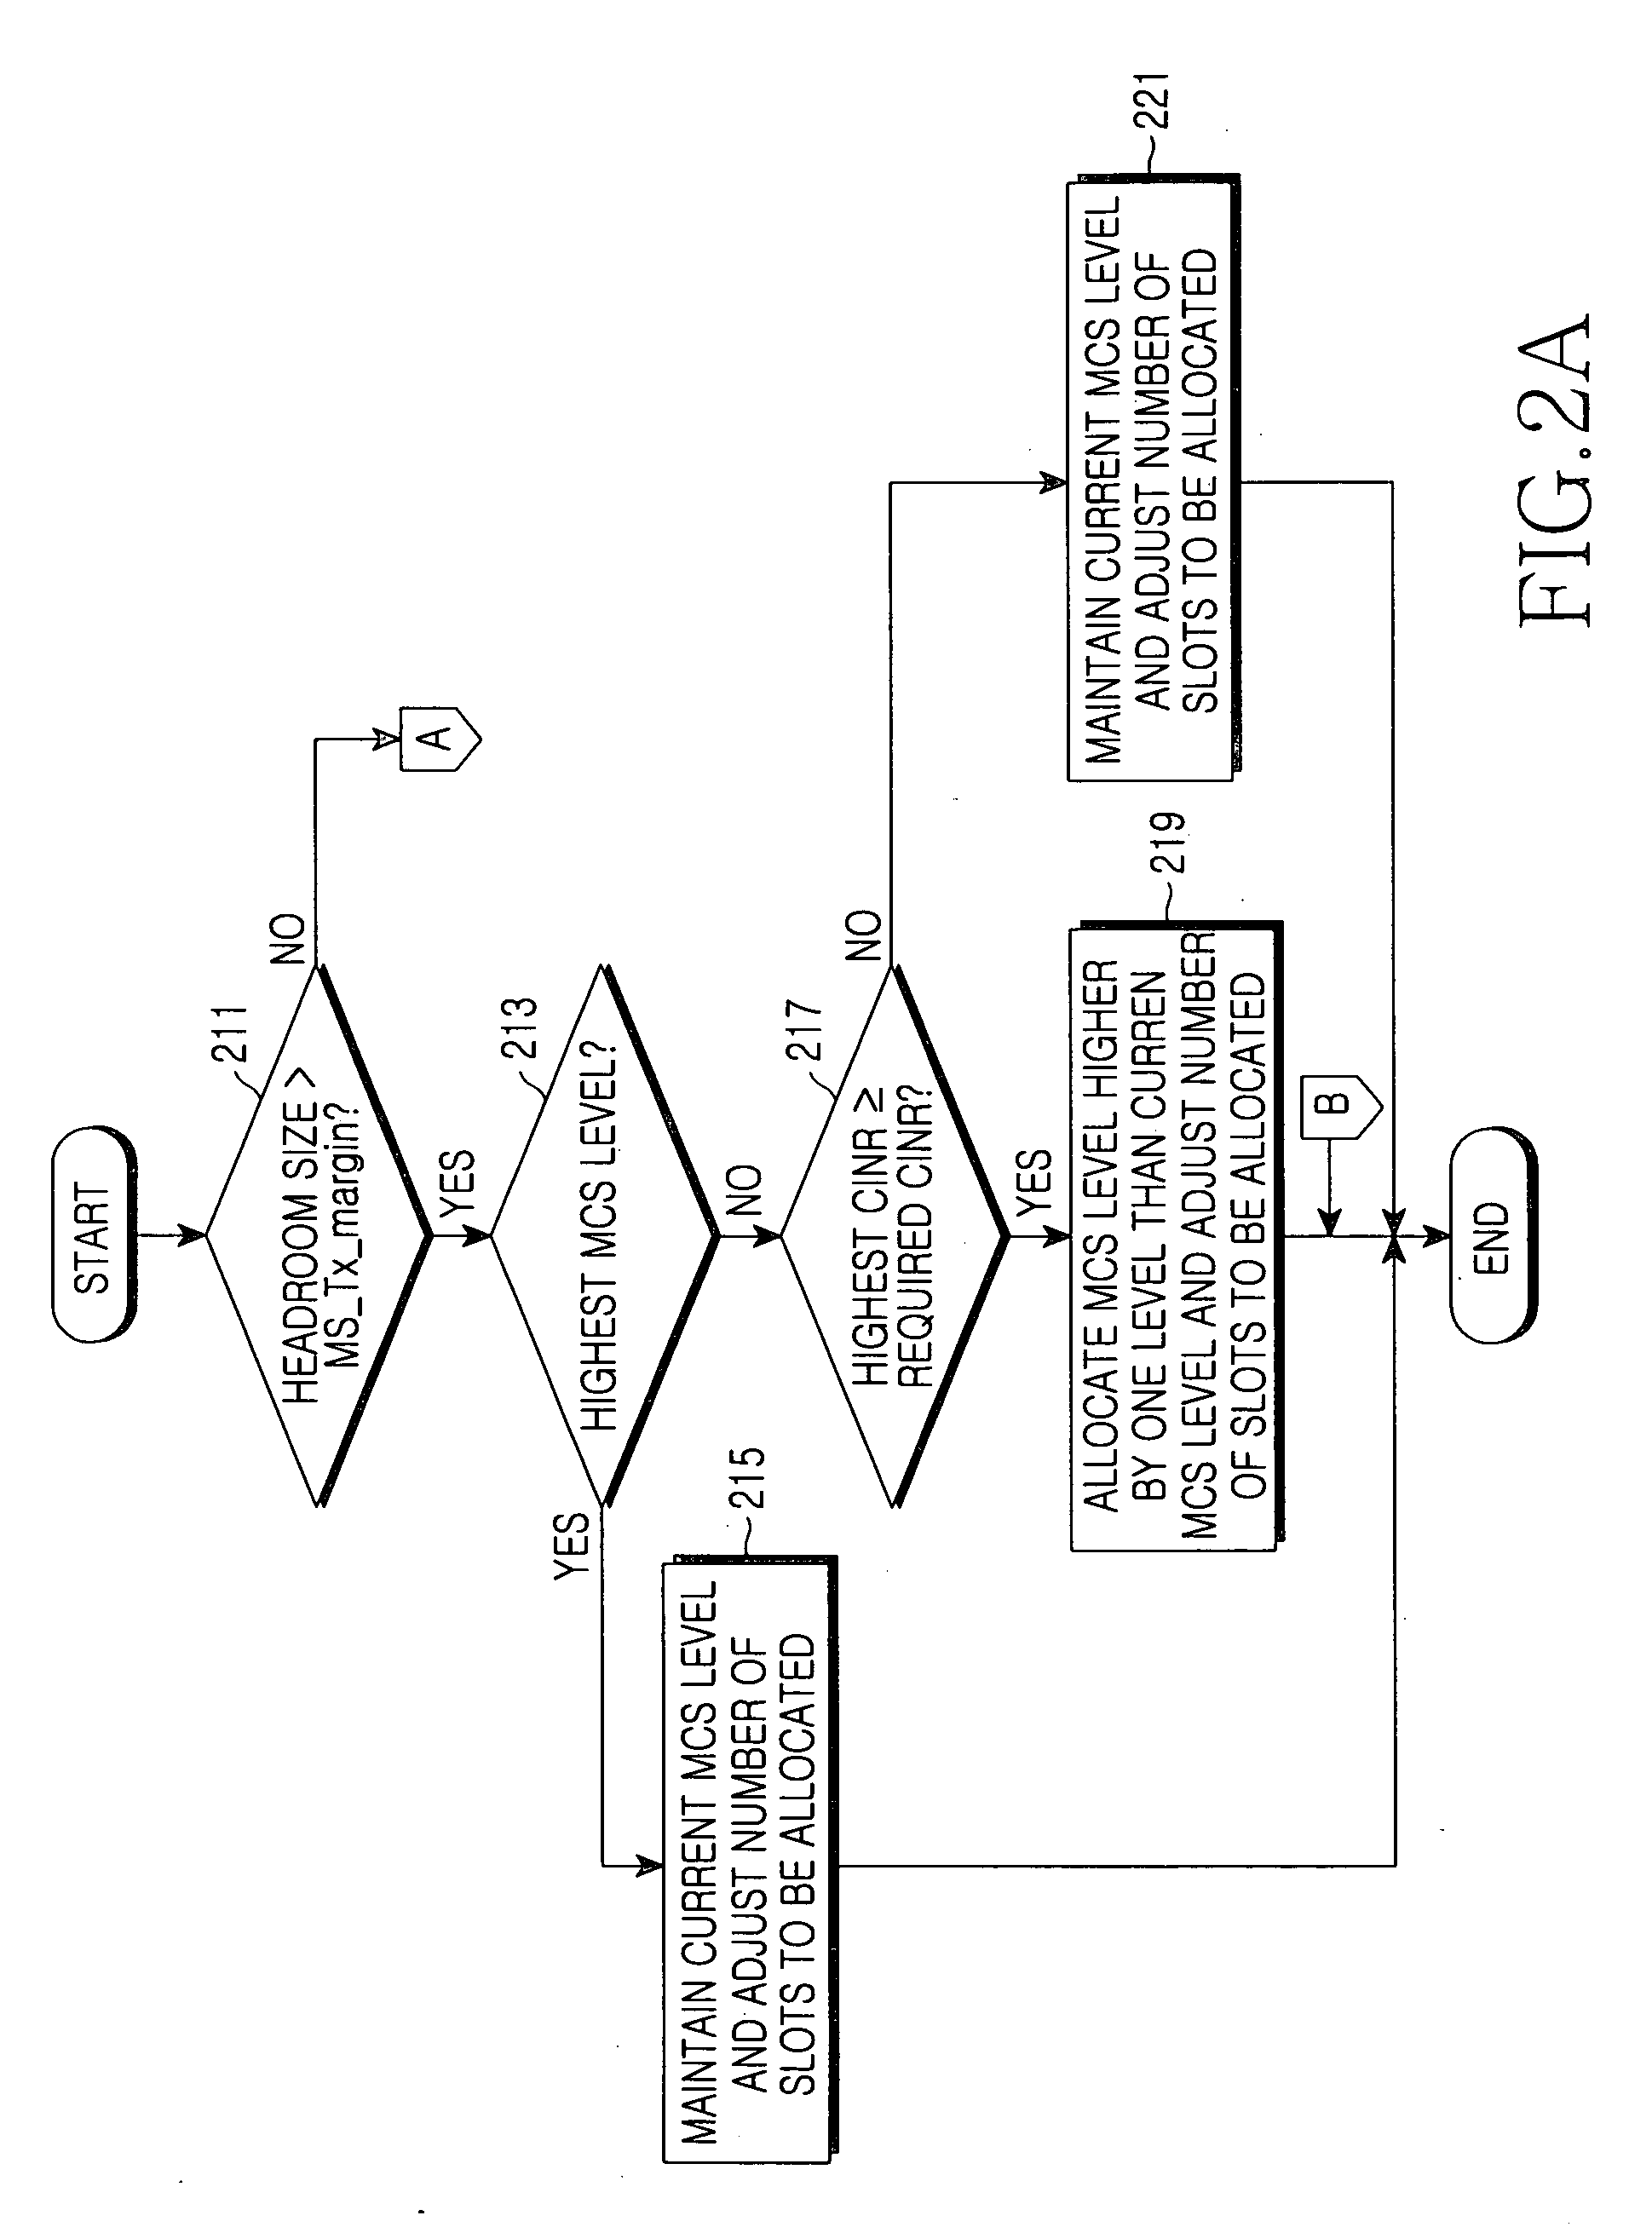 System and method for scheduling uplink in a communication system